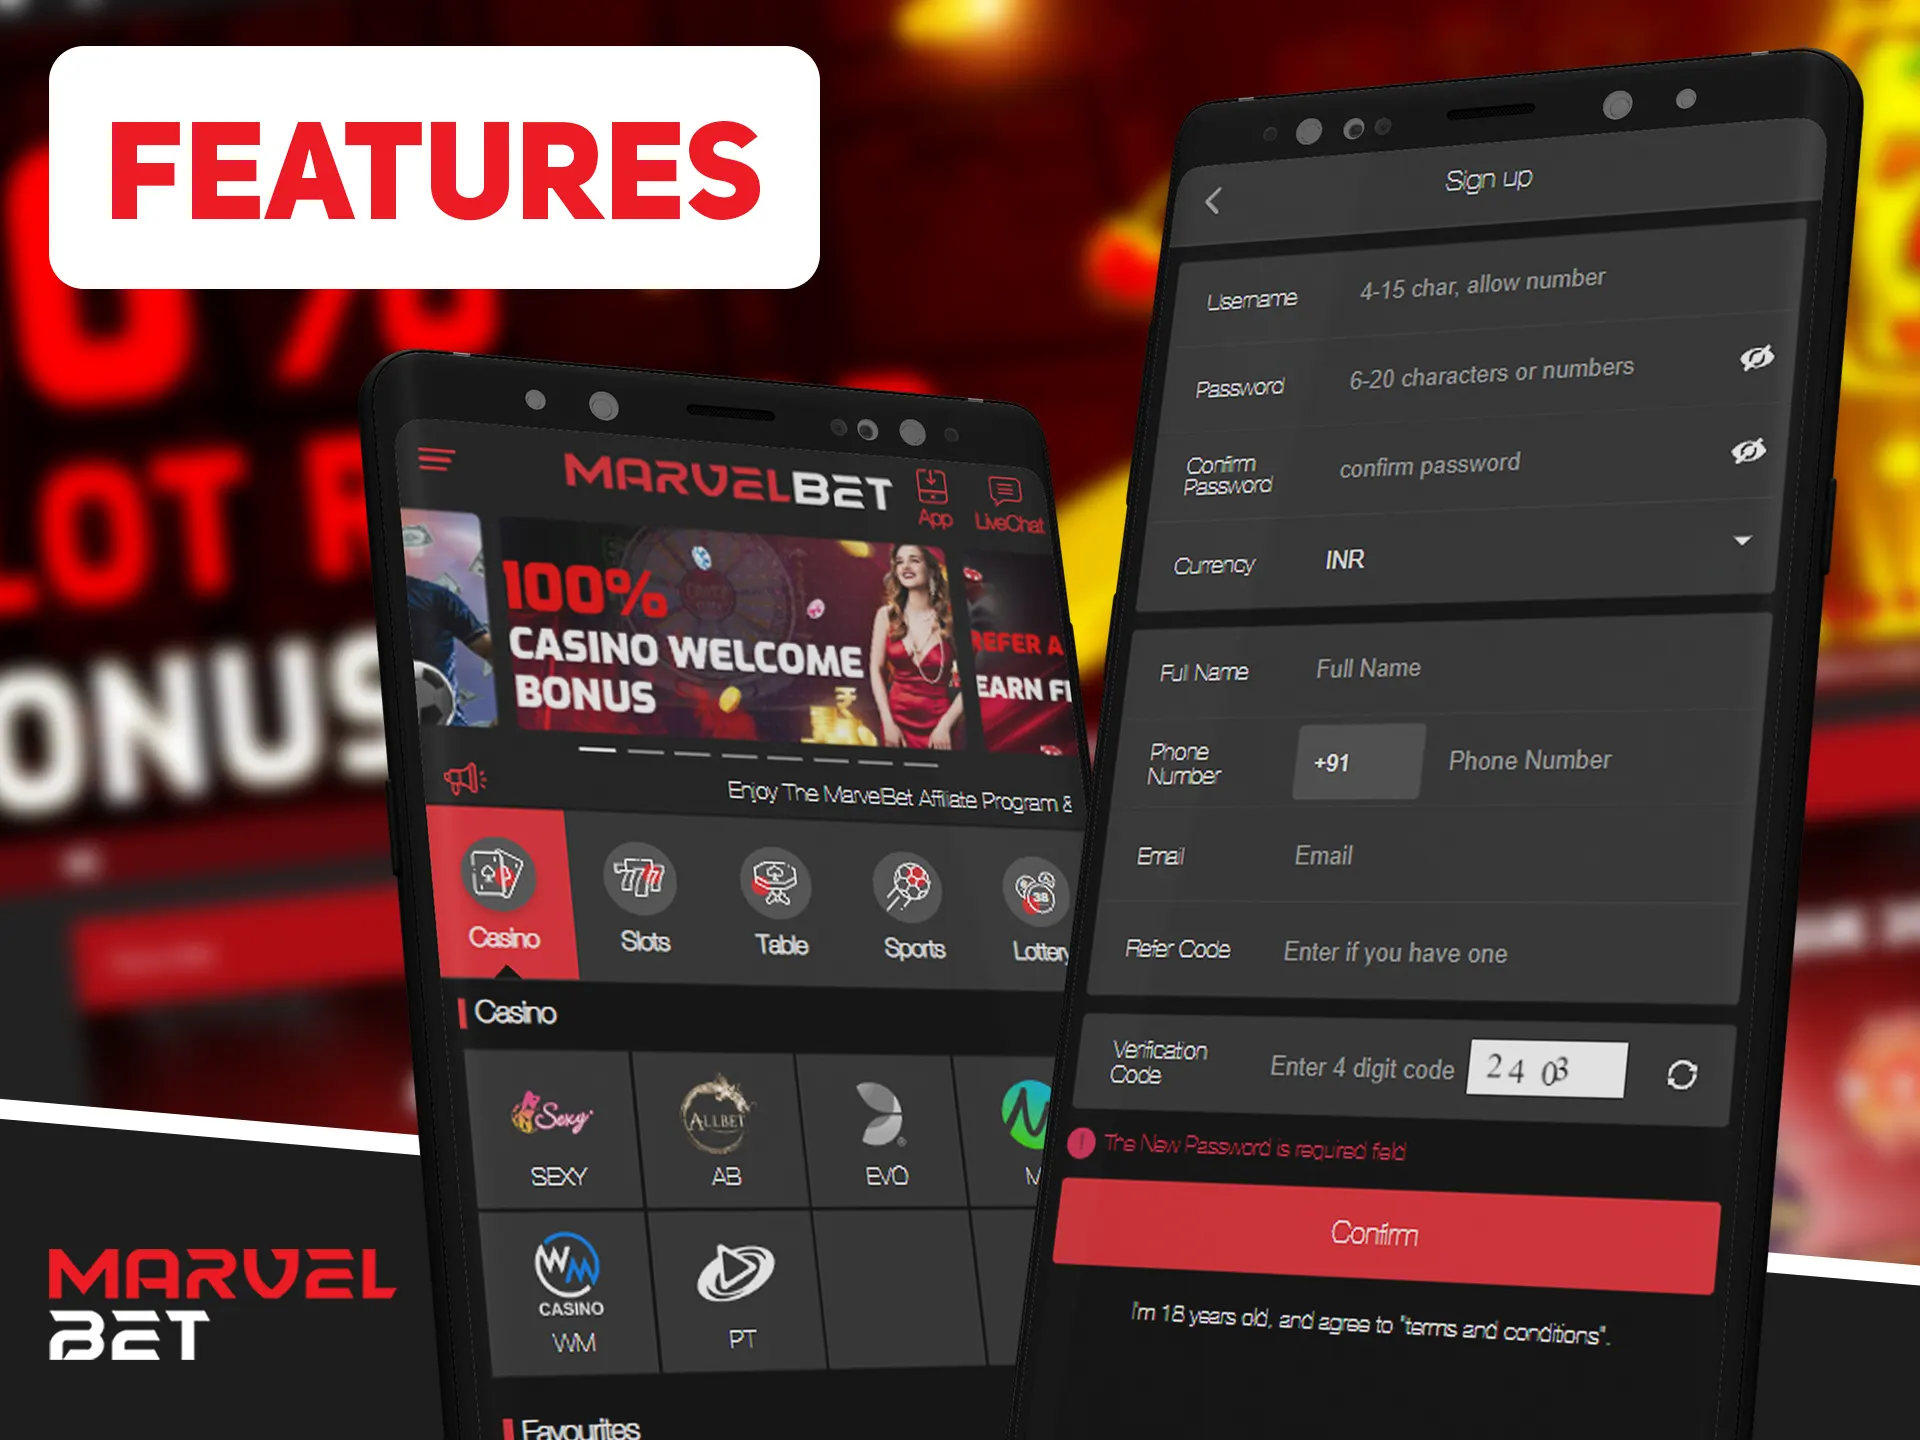 Search for new features of Marvelbet app.